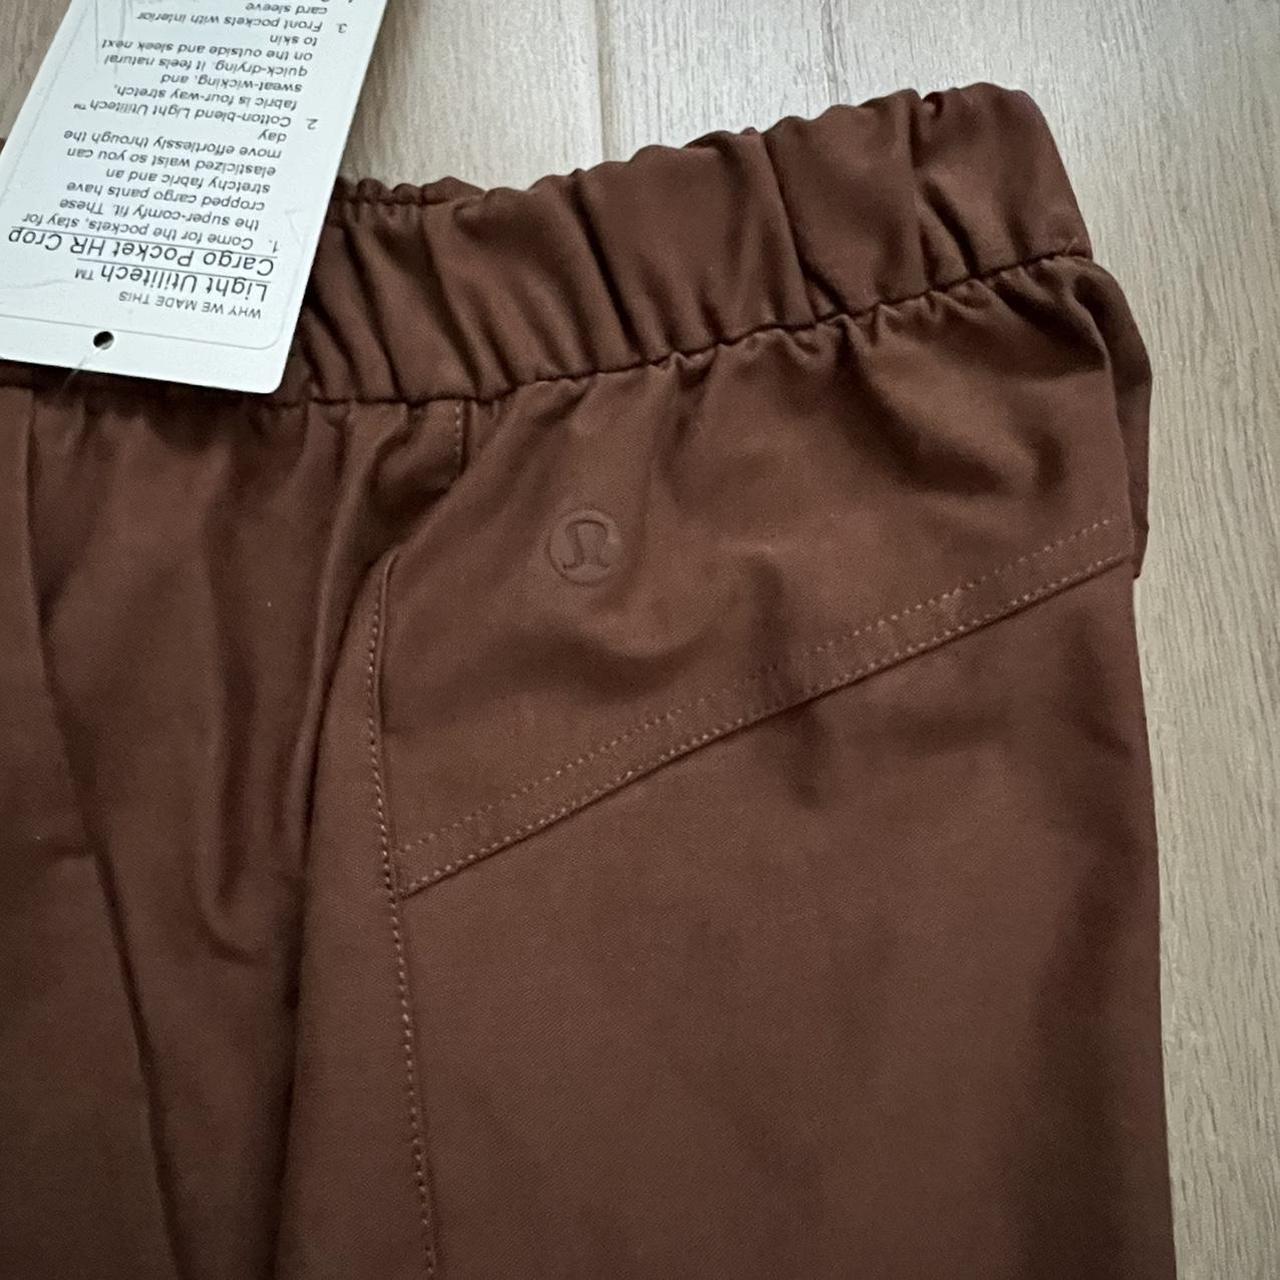 Utilitech cargo pocket high rise pants in roasted brown and